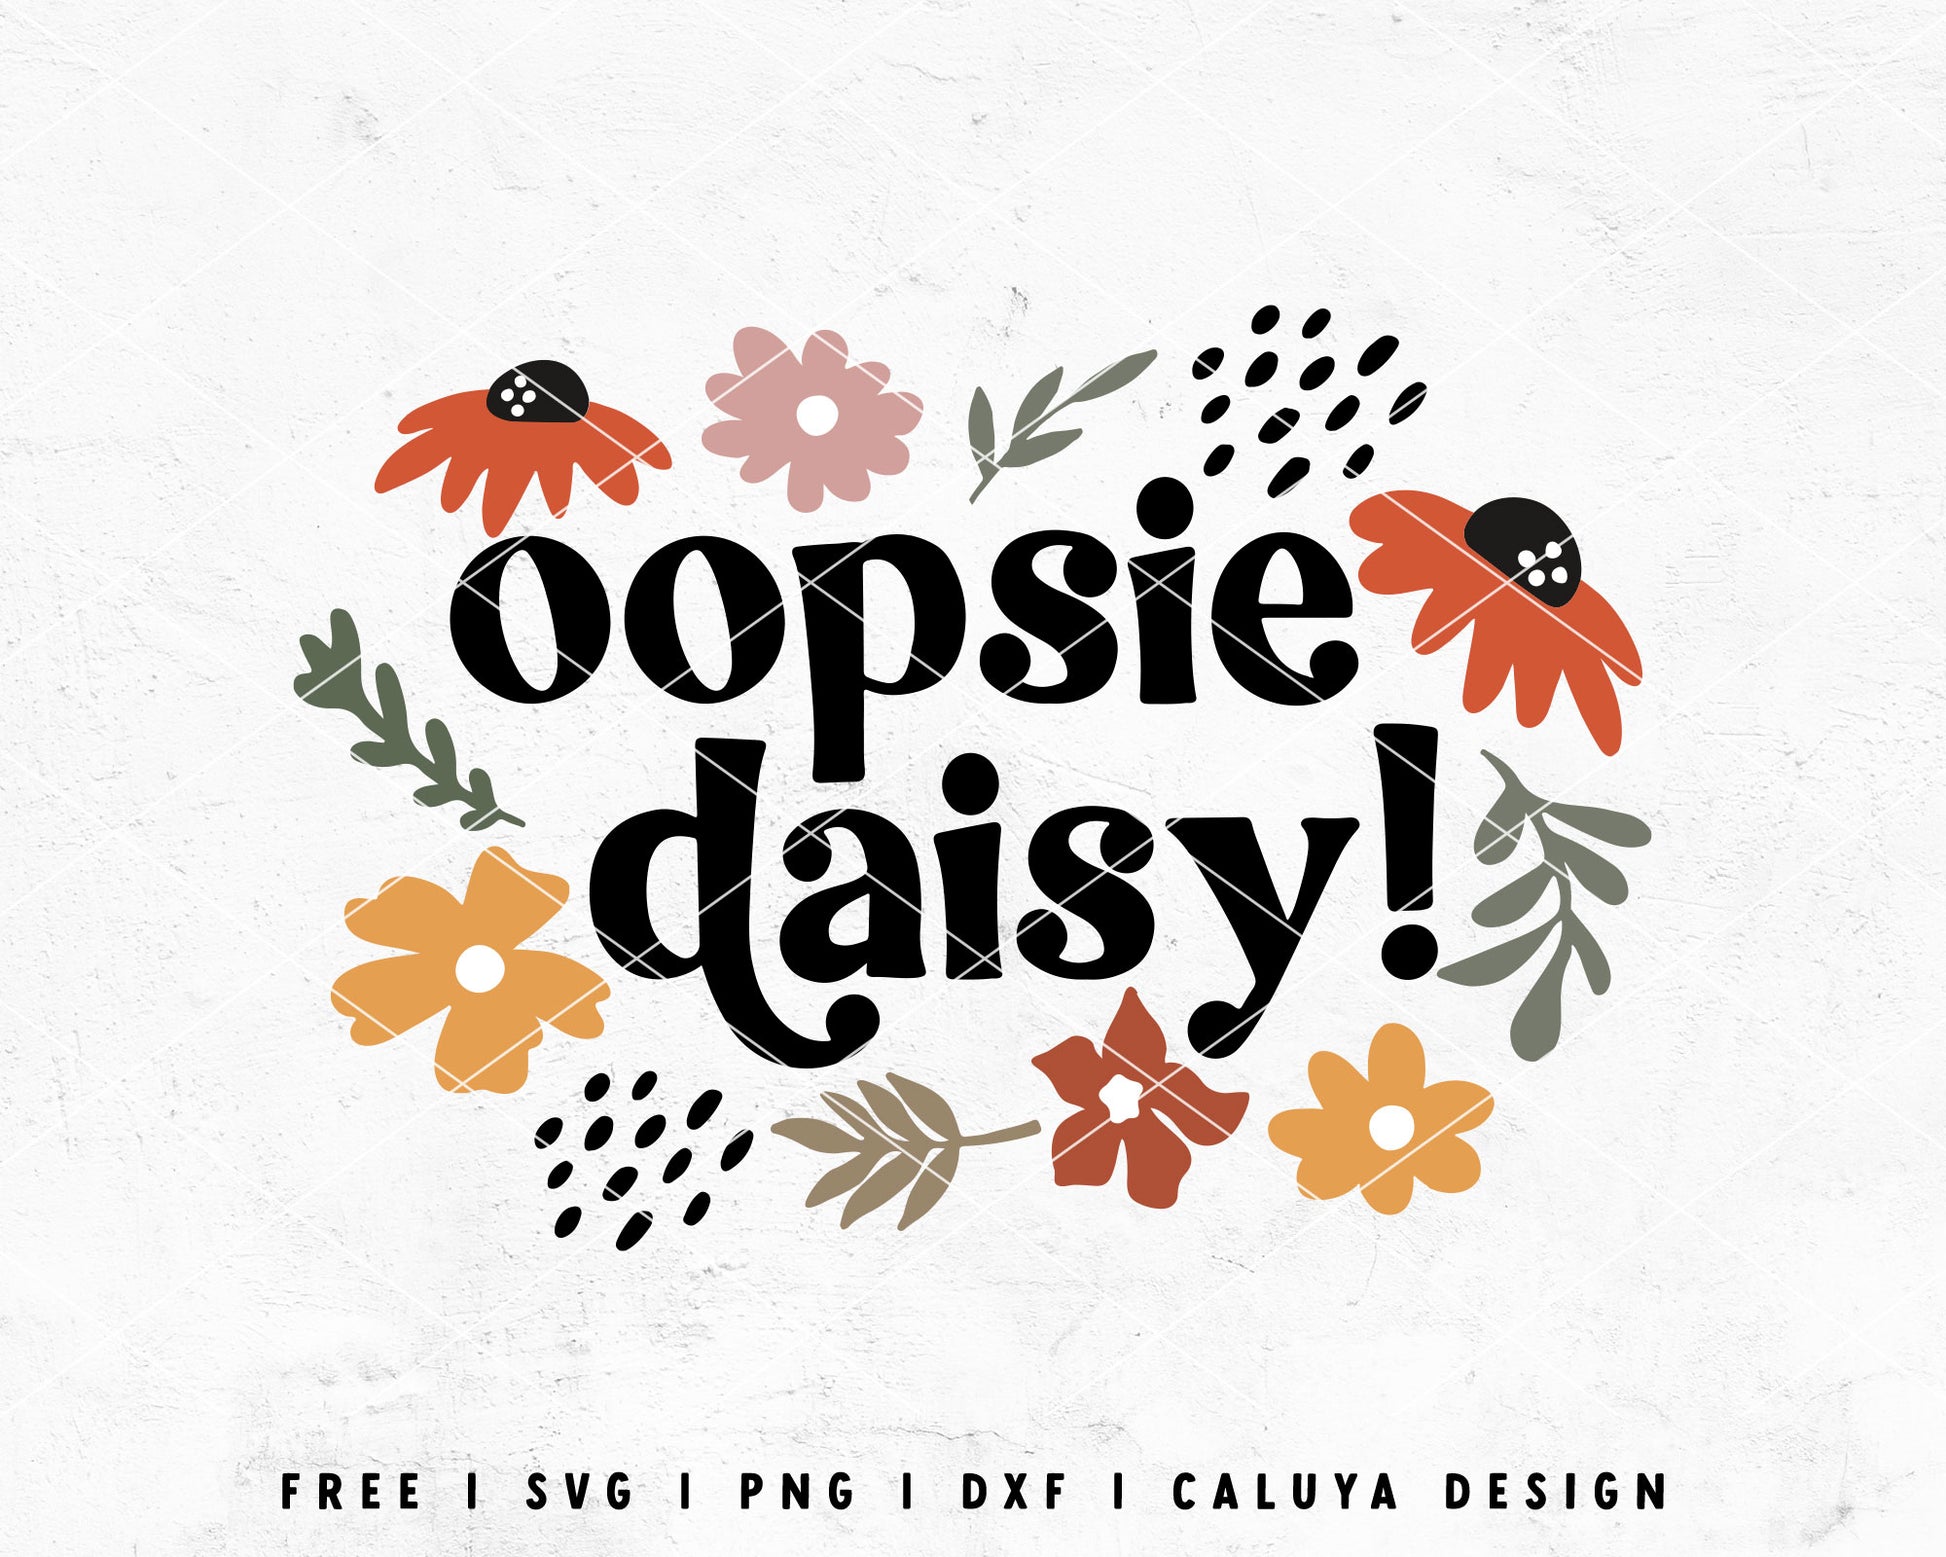 FREE Daisy SVG | Matisse Flower SVG Cut File for Cricut, Cameo Silhouette | Free SVG Cut File